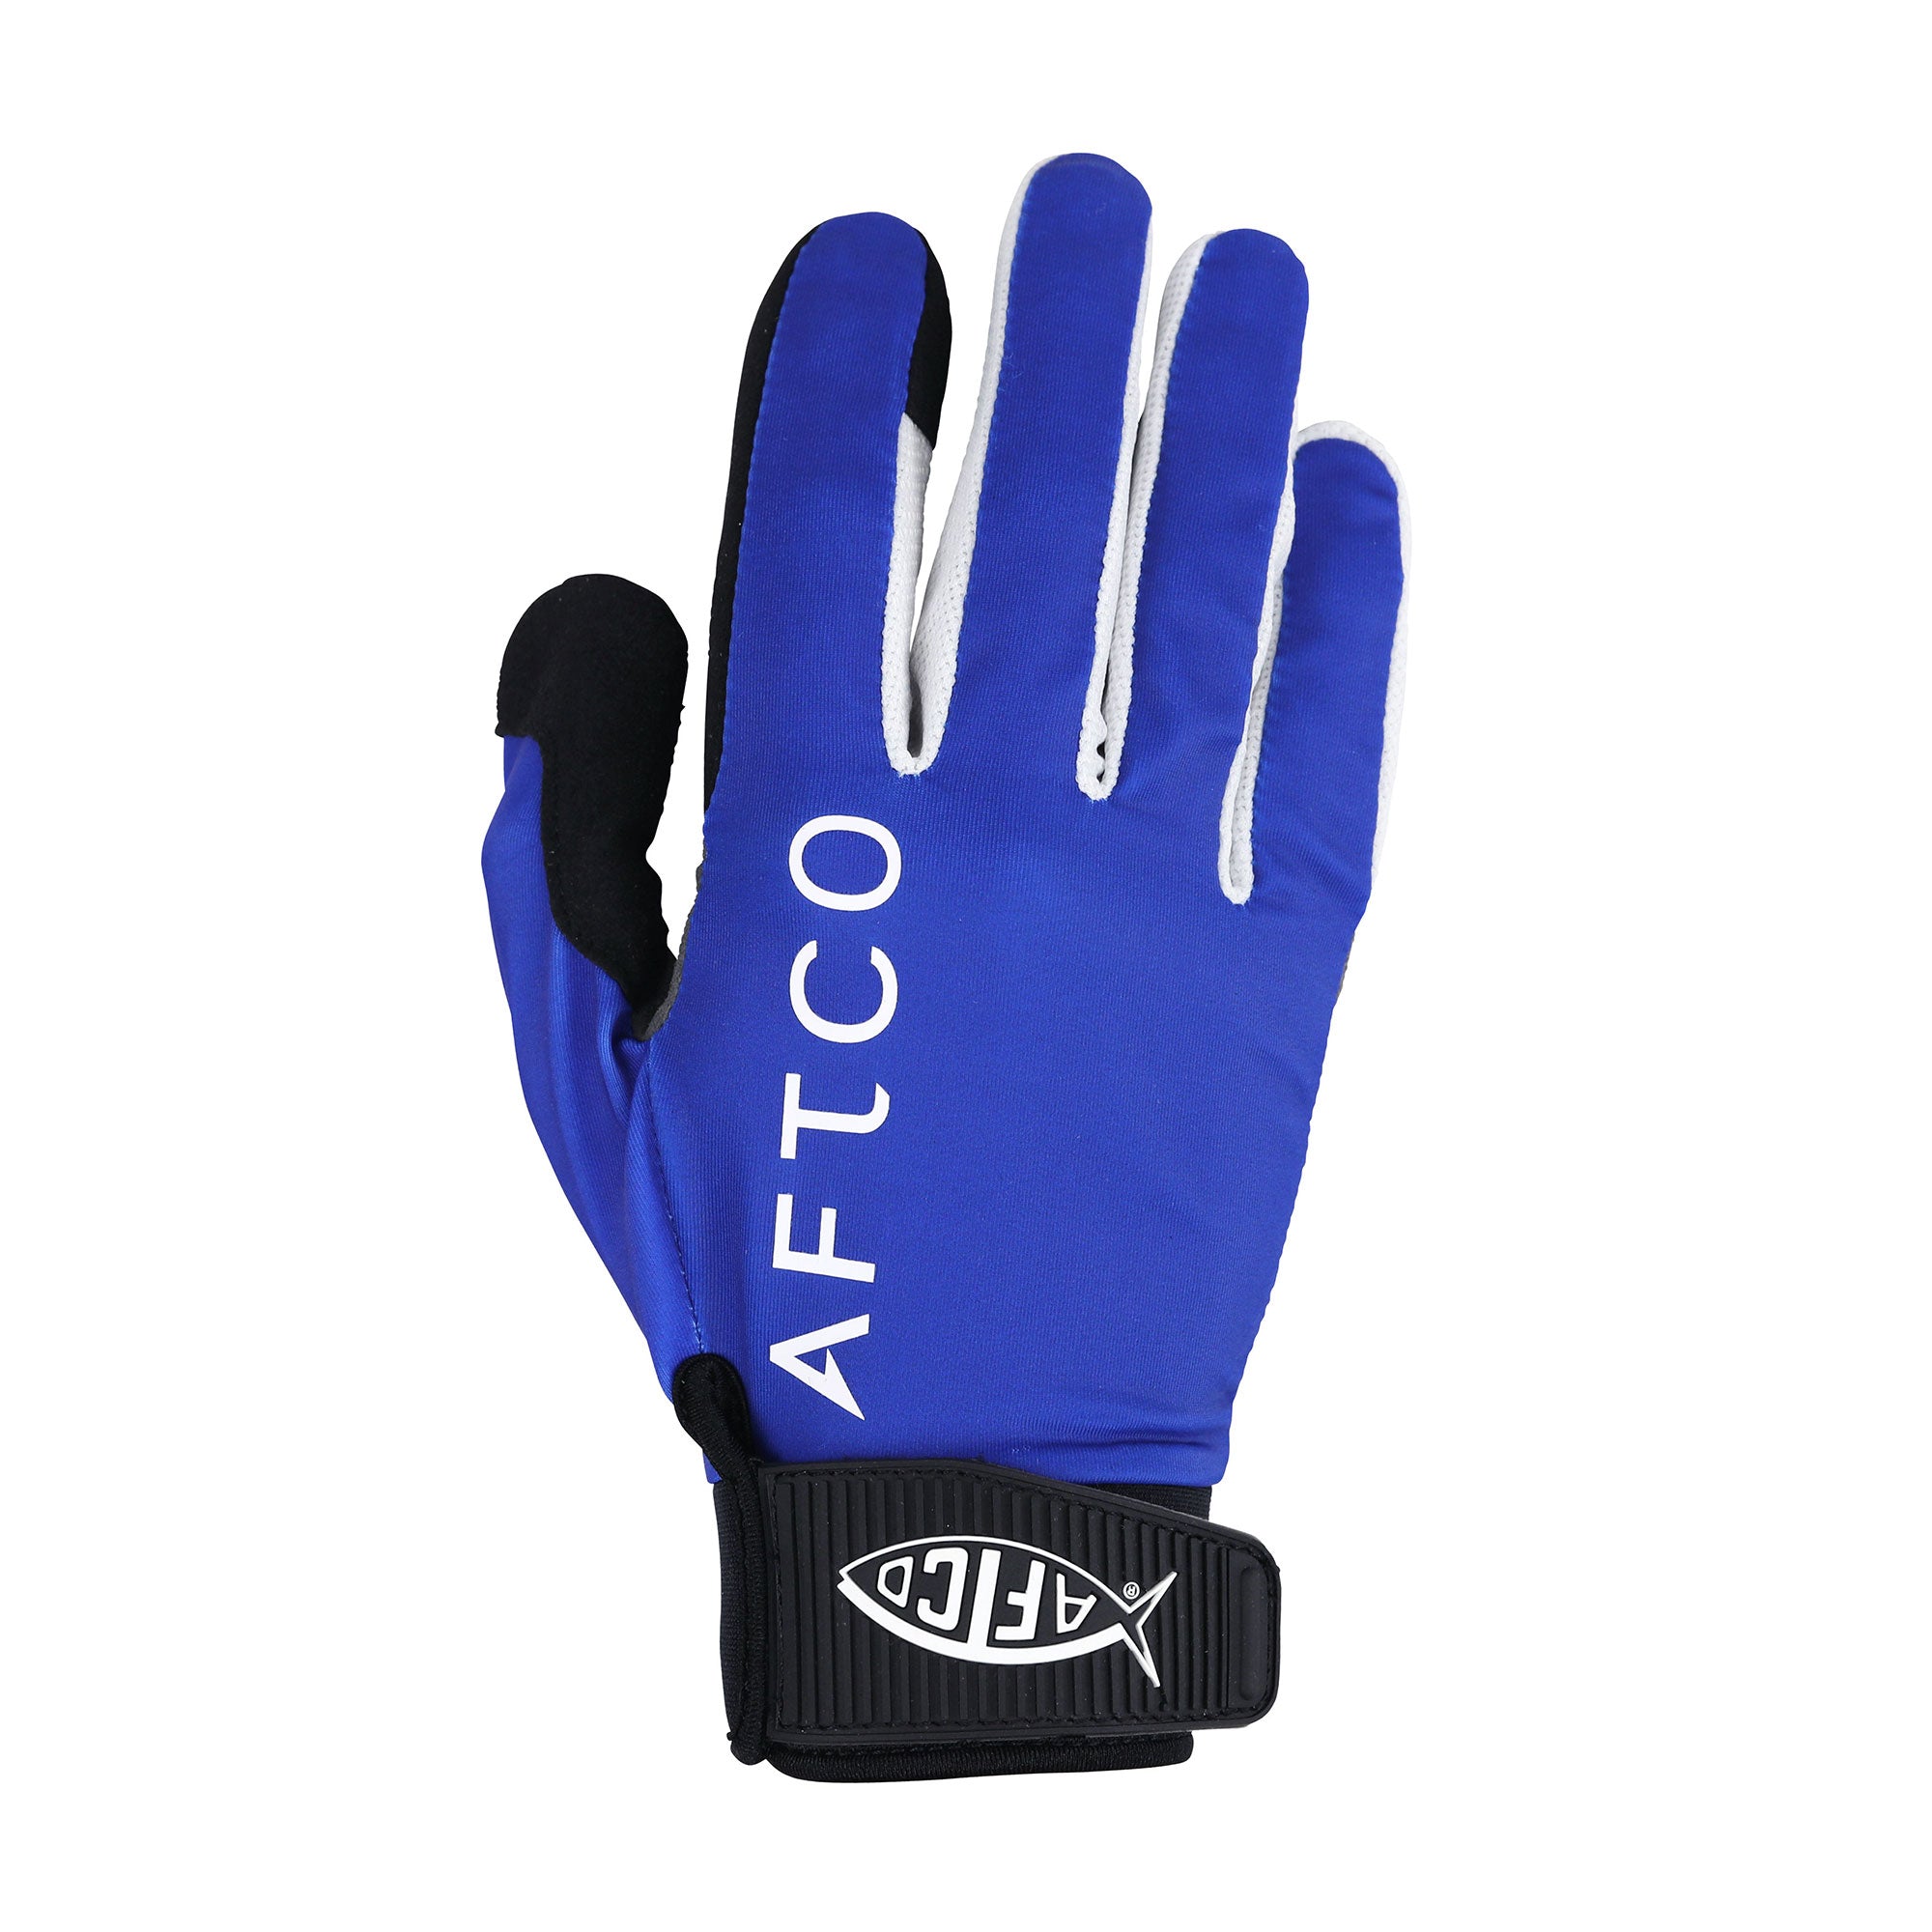 Solmar UV Gloves from Aftco